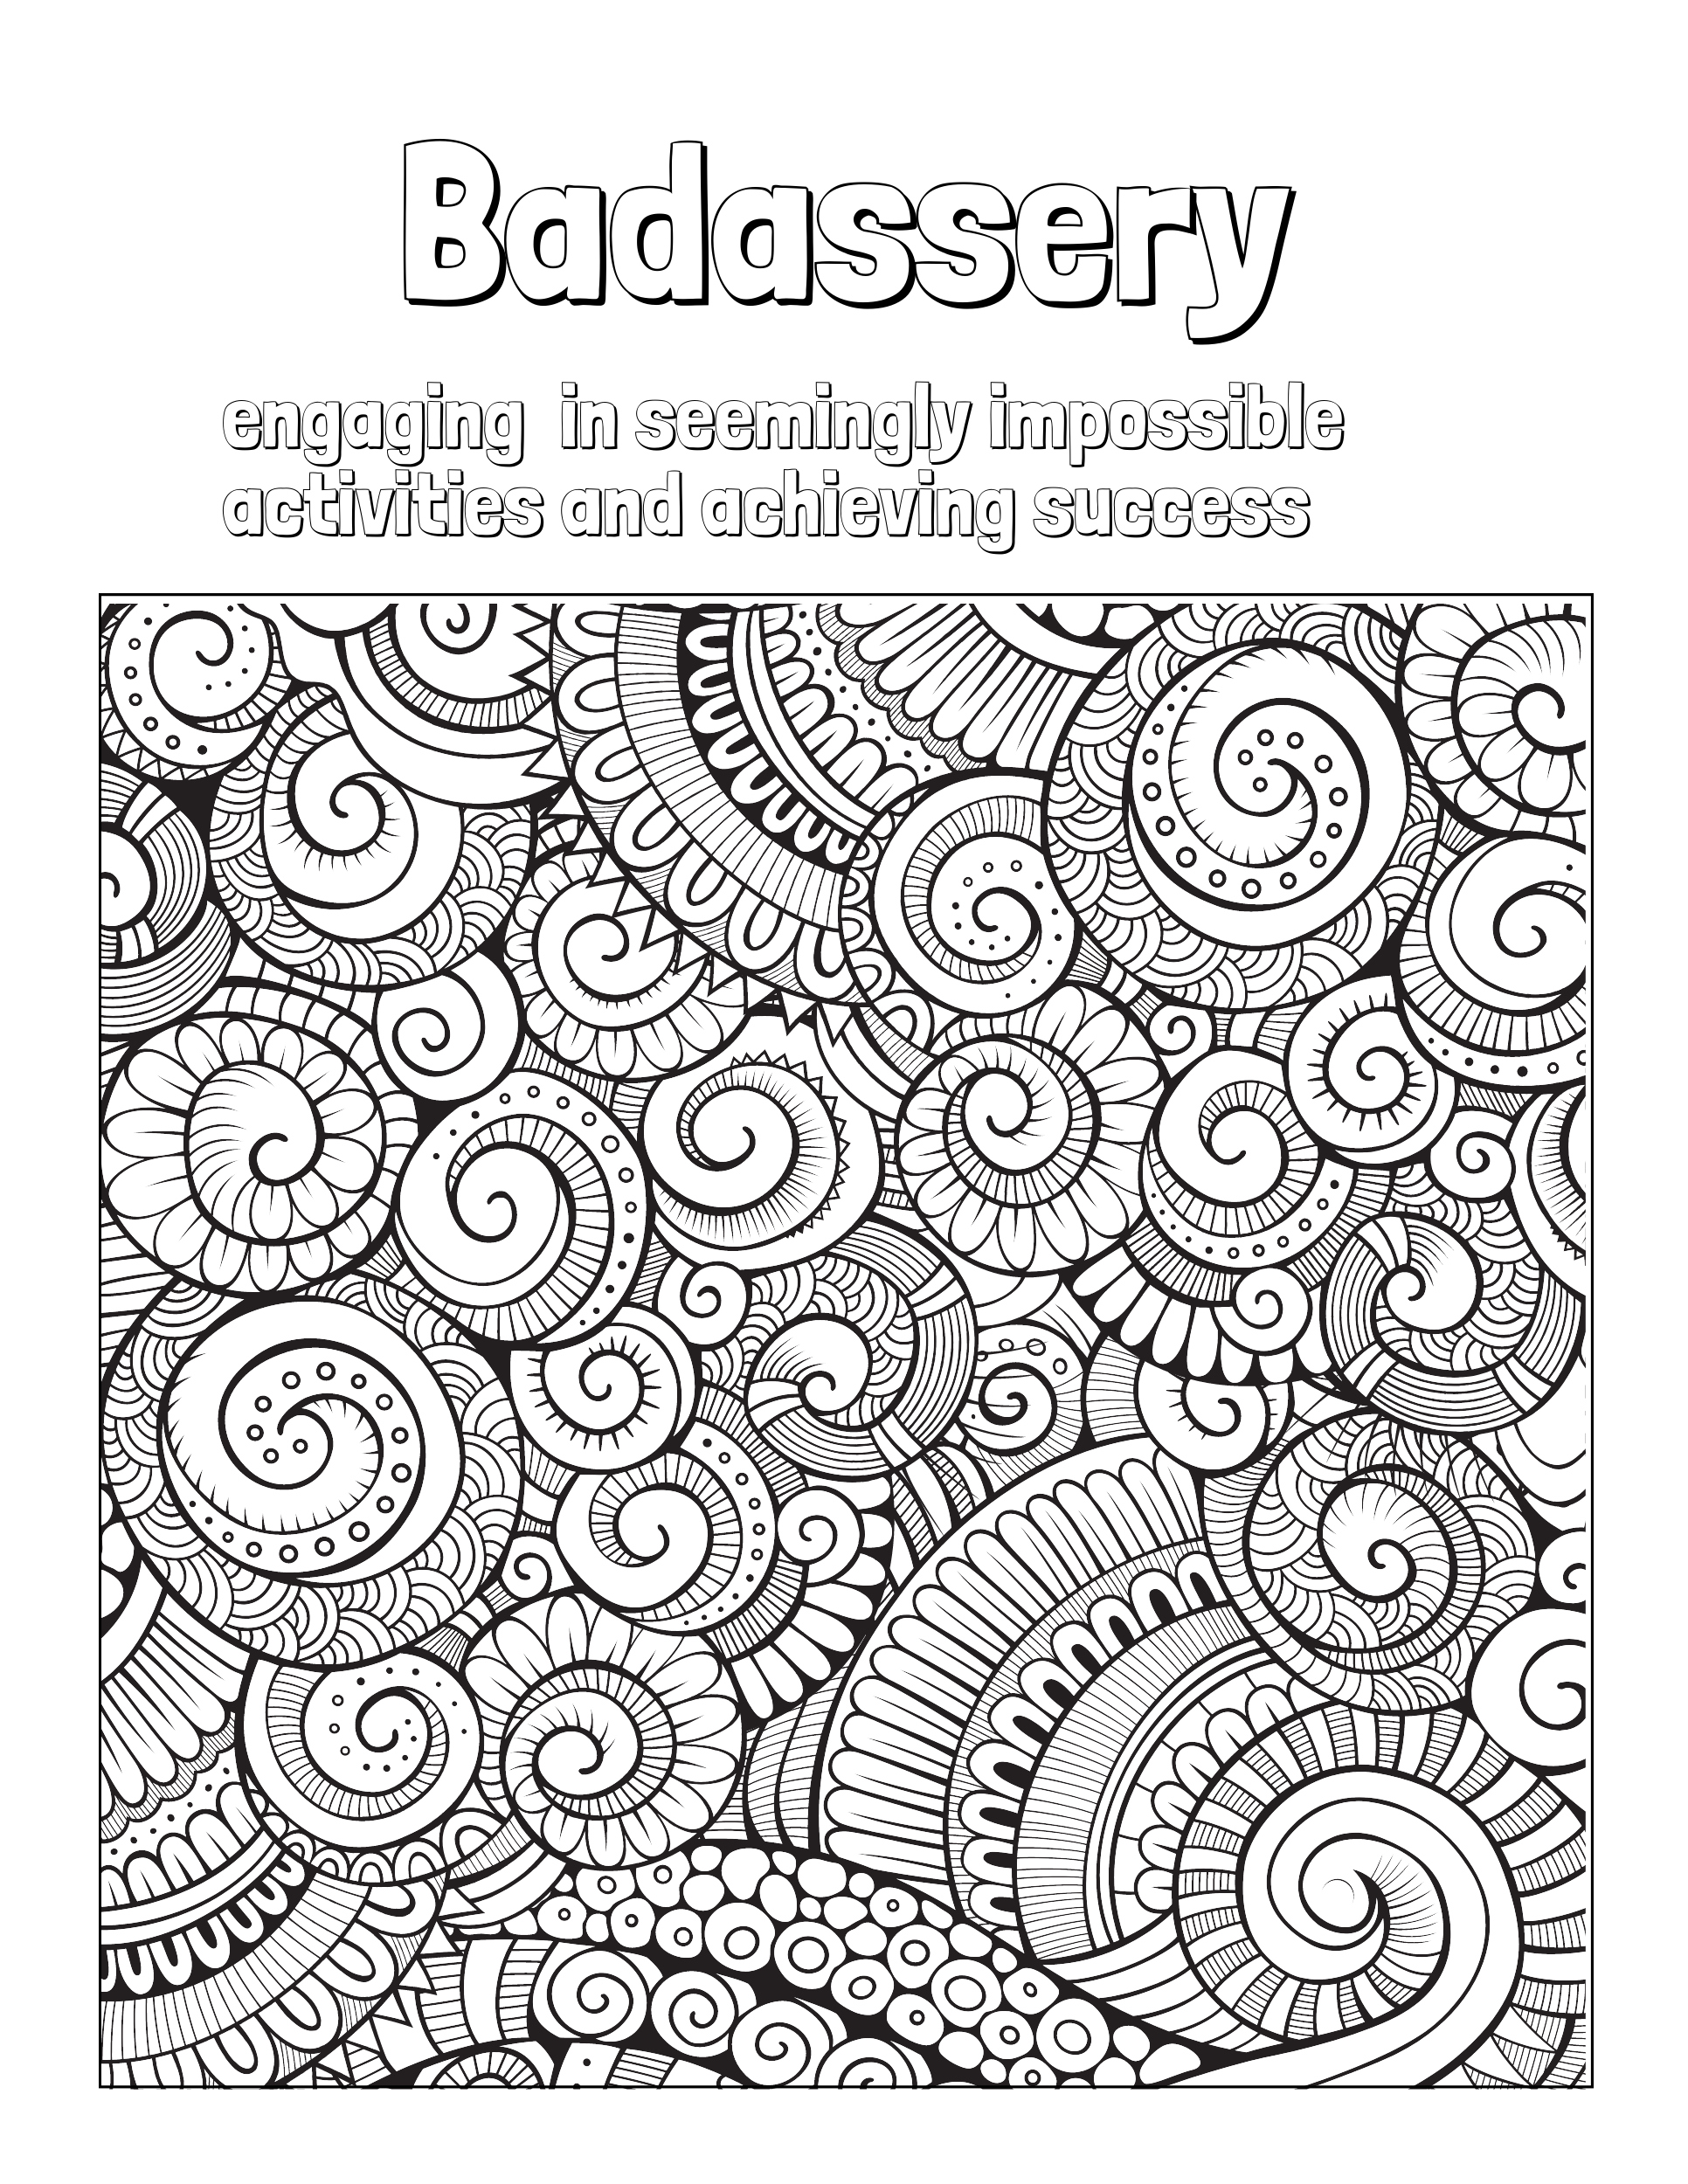 Printable motivational swear word coloring pages for adults funny swe